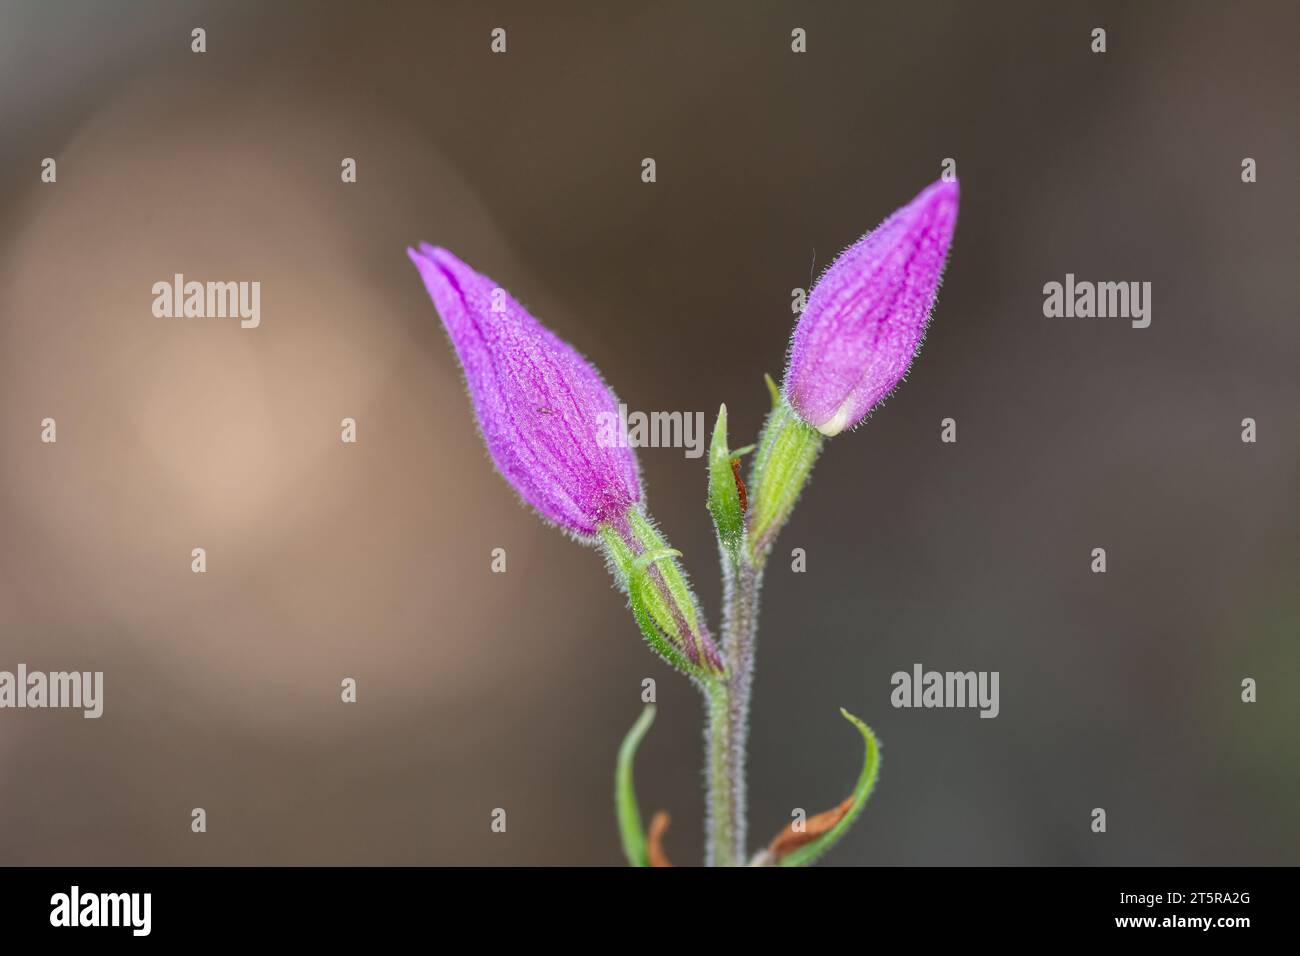 Close-up of the brightly blooming purple cephalanthera rubra flower growing against the blurred background in nature. Stock Photo